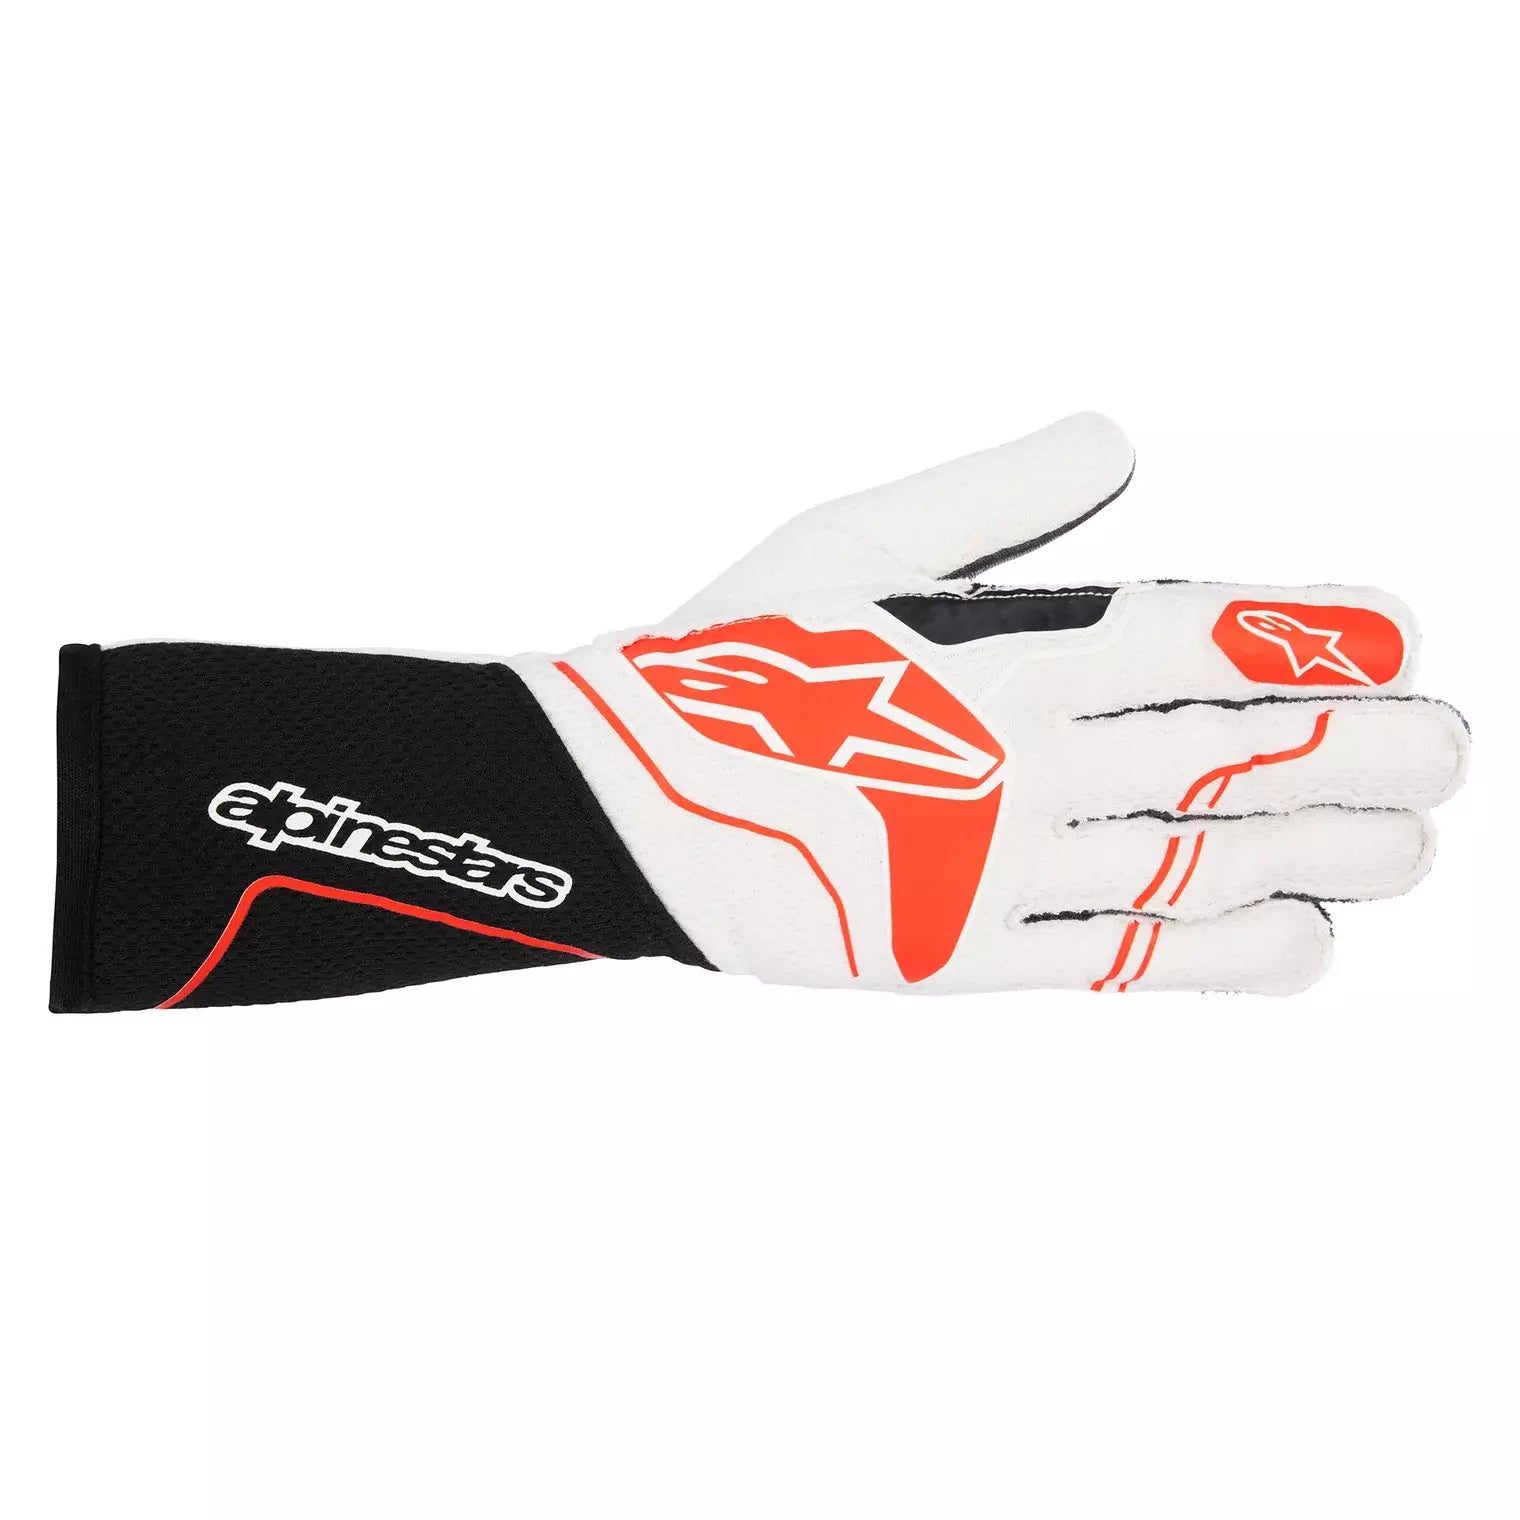 Alpinestars Gloves Tech 1-ZX White / Red Medium Safety Clothing Driving Gloves main image